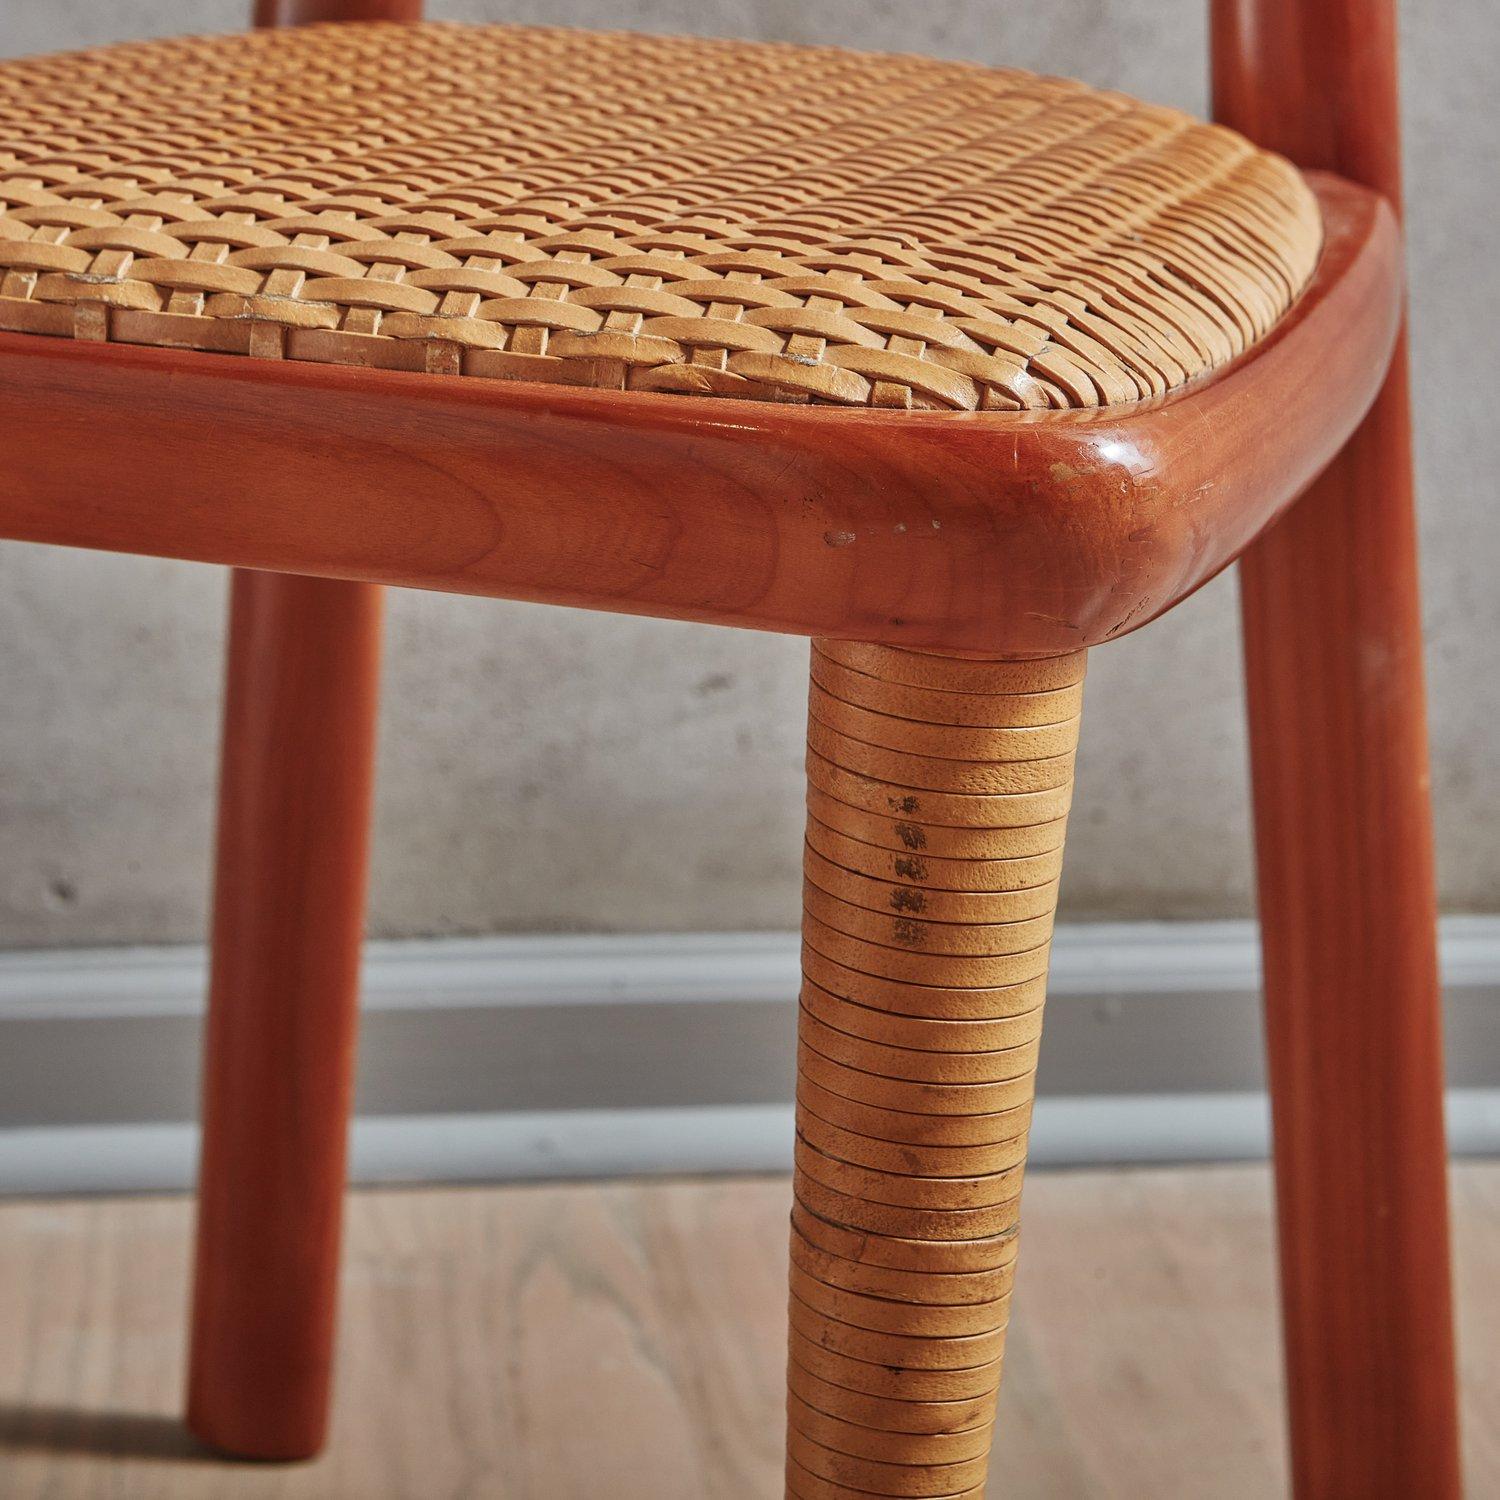 Set of 6 Wood + Woven Leather Dining Chairs by Pierantonio Bonacina, Italy 1970s For Sale 13